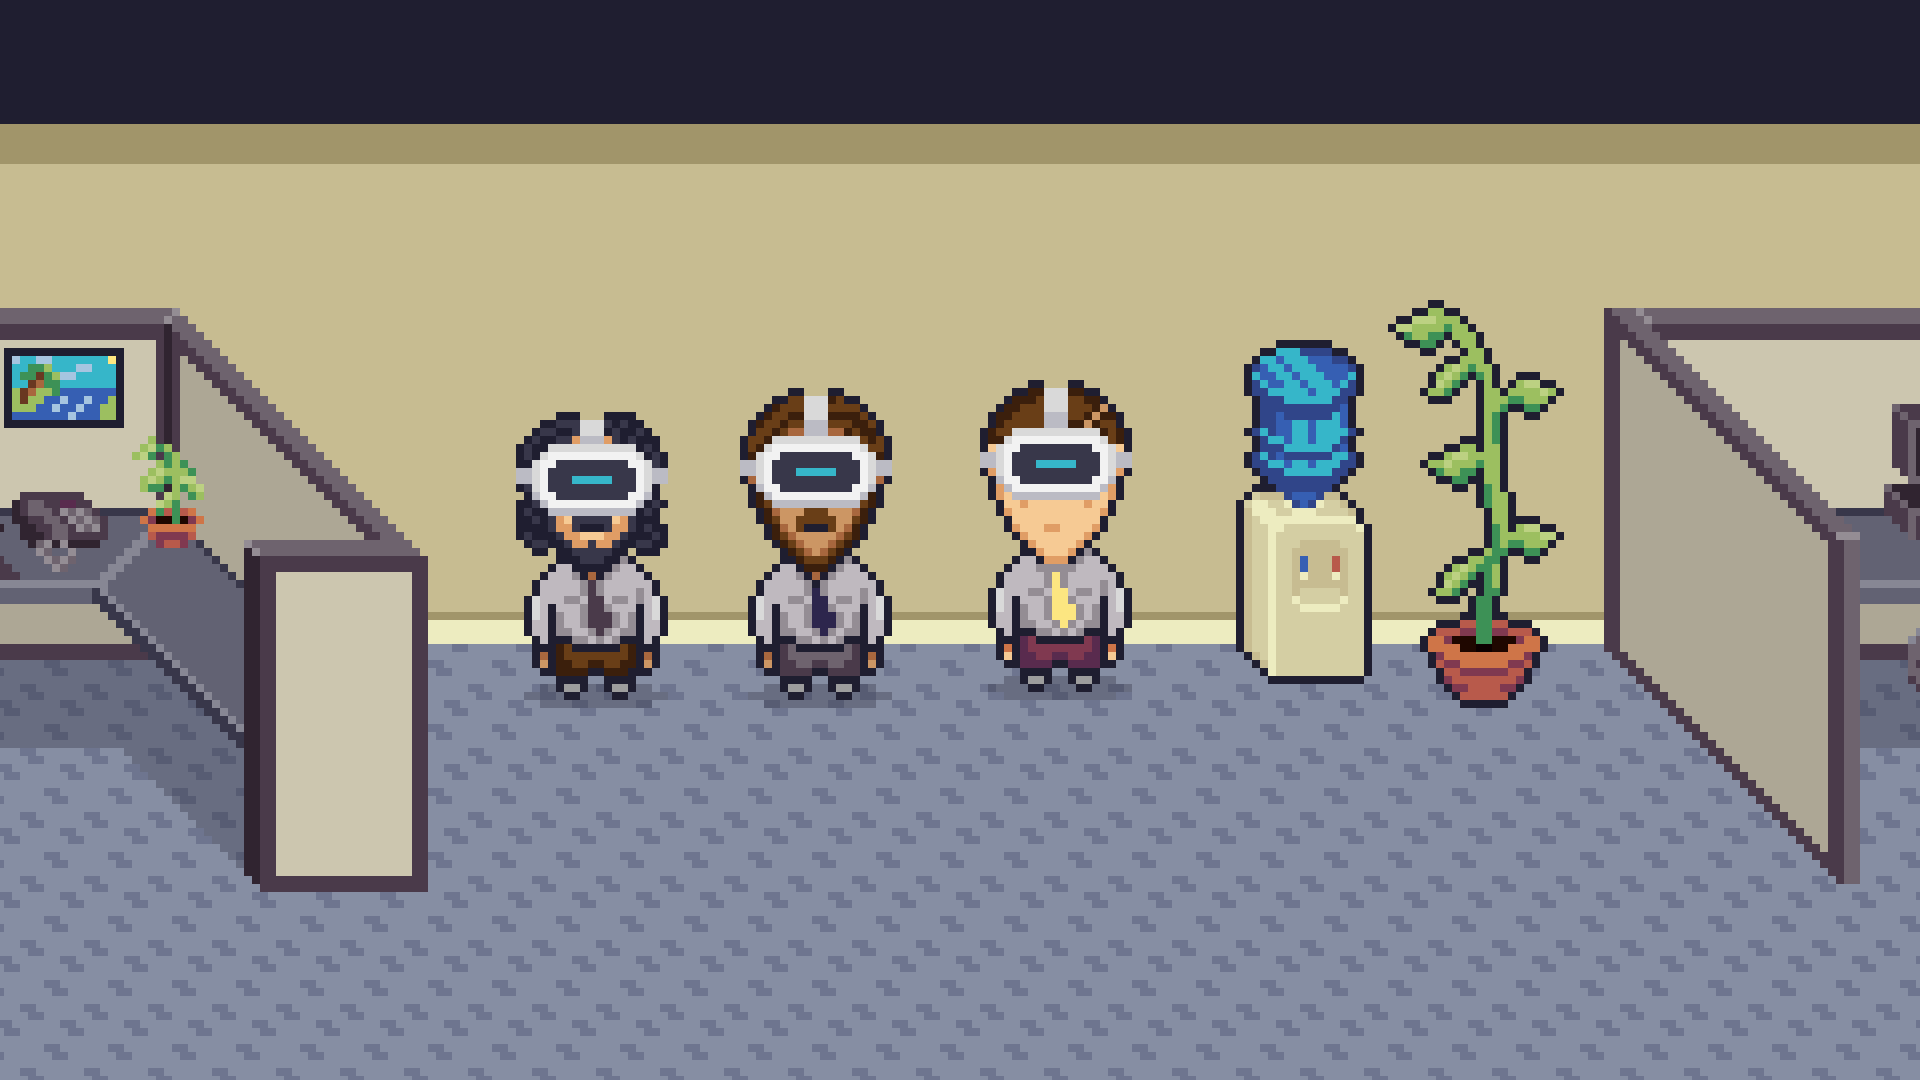 pixelart characters standing around water cooler with VR headsets on